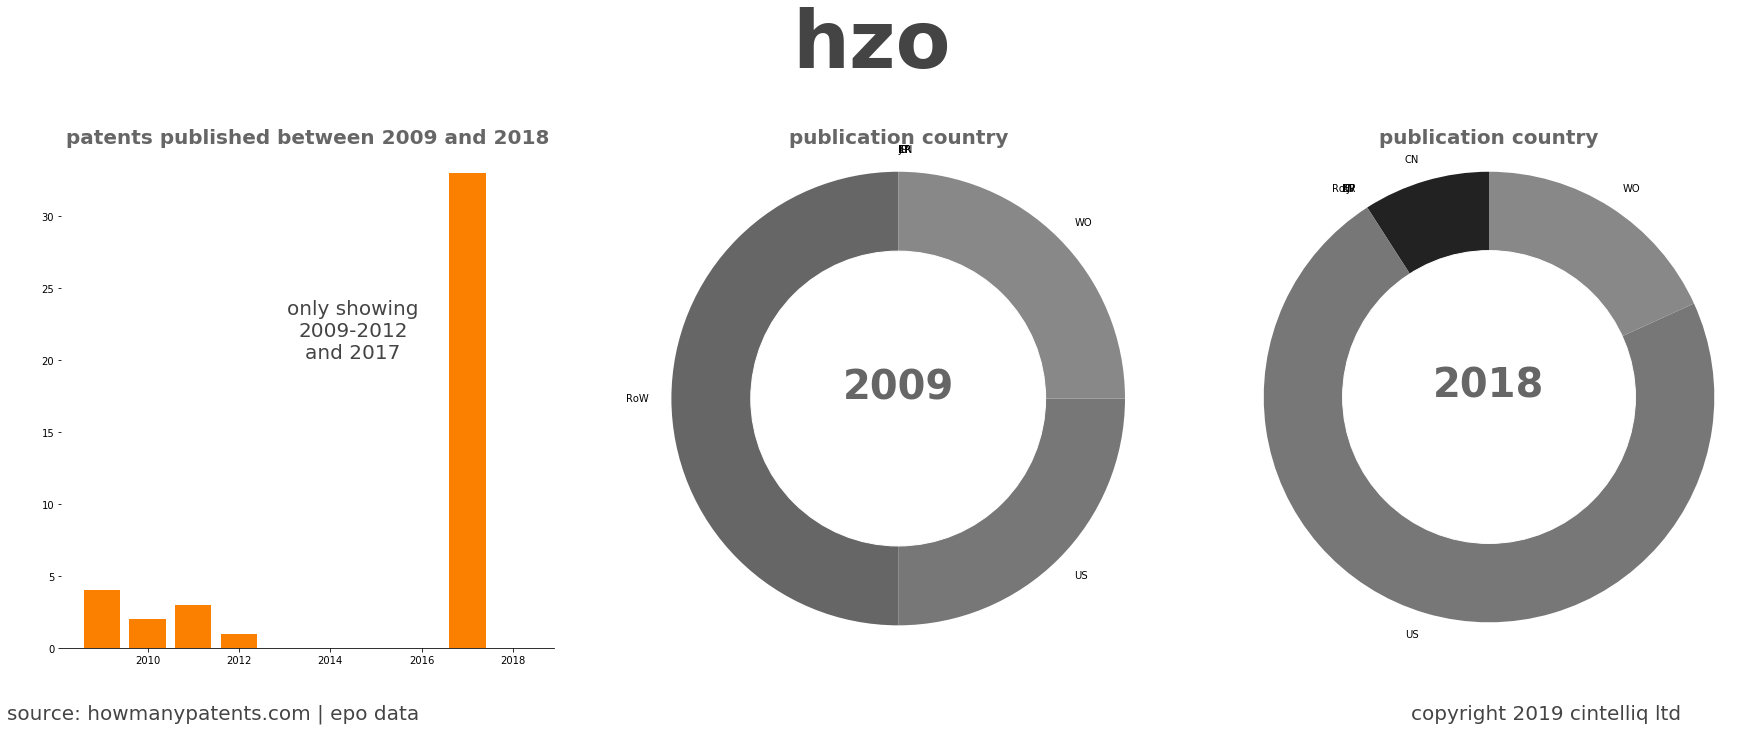 summary of patents for Hzo